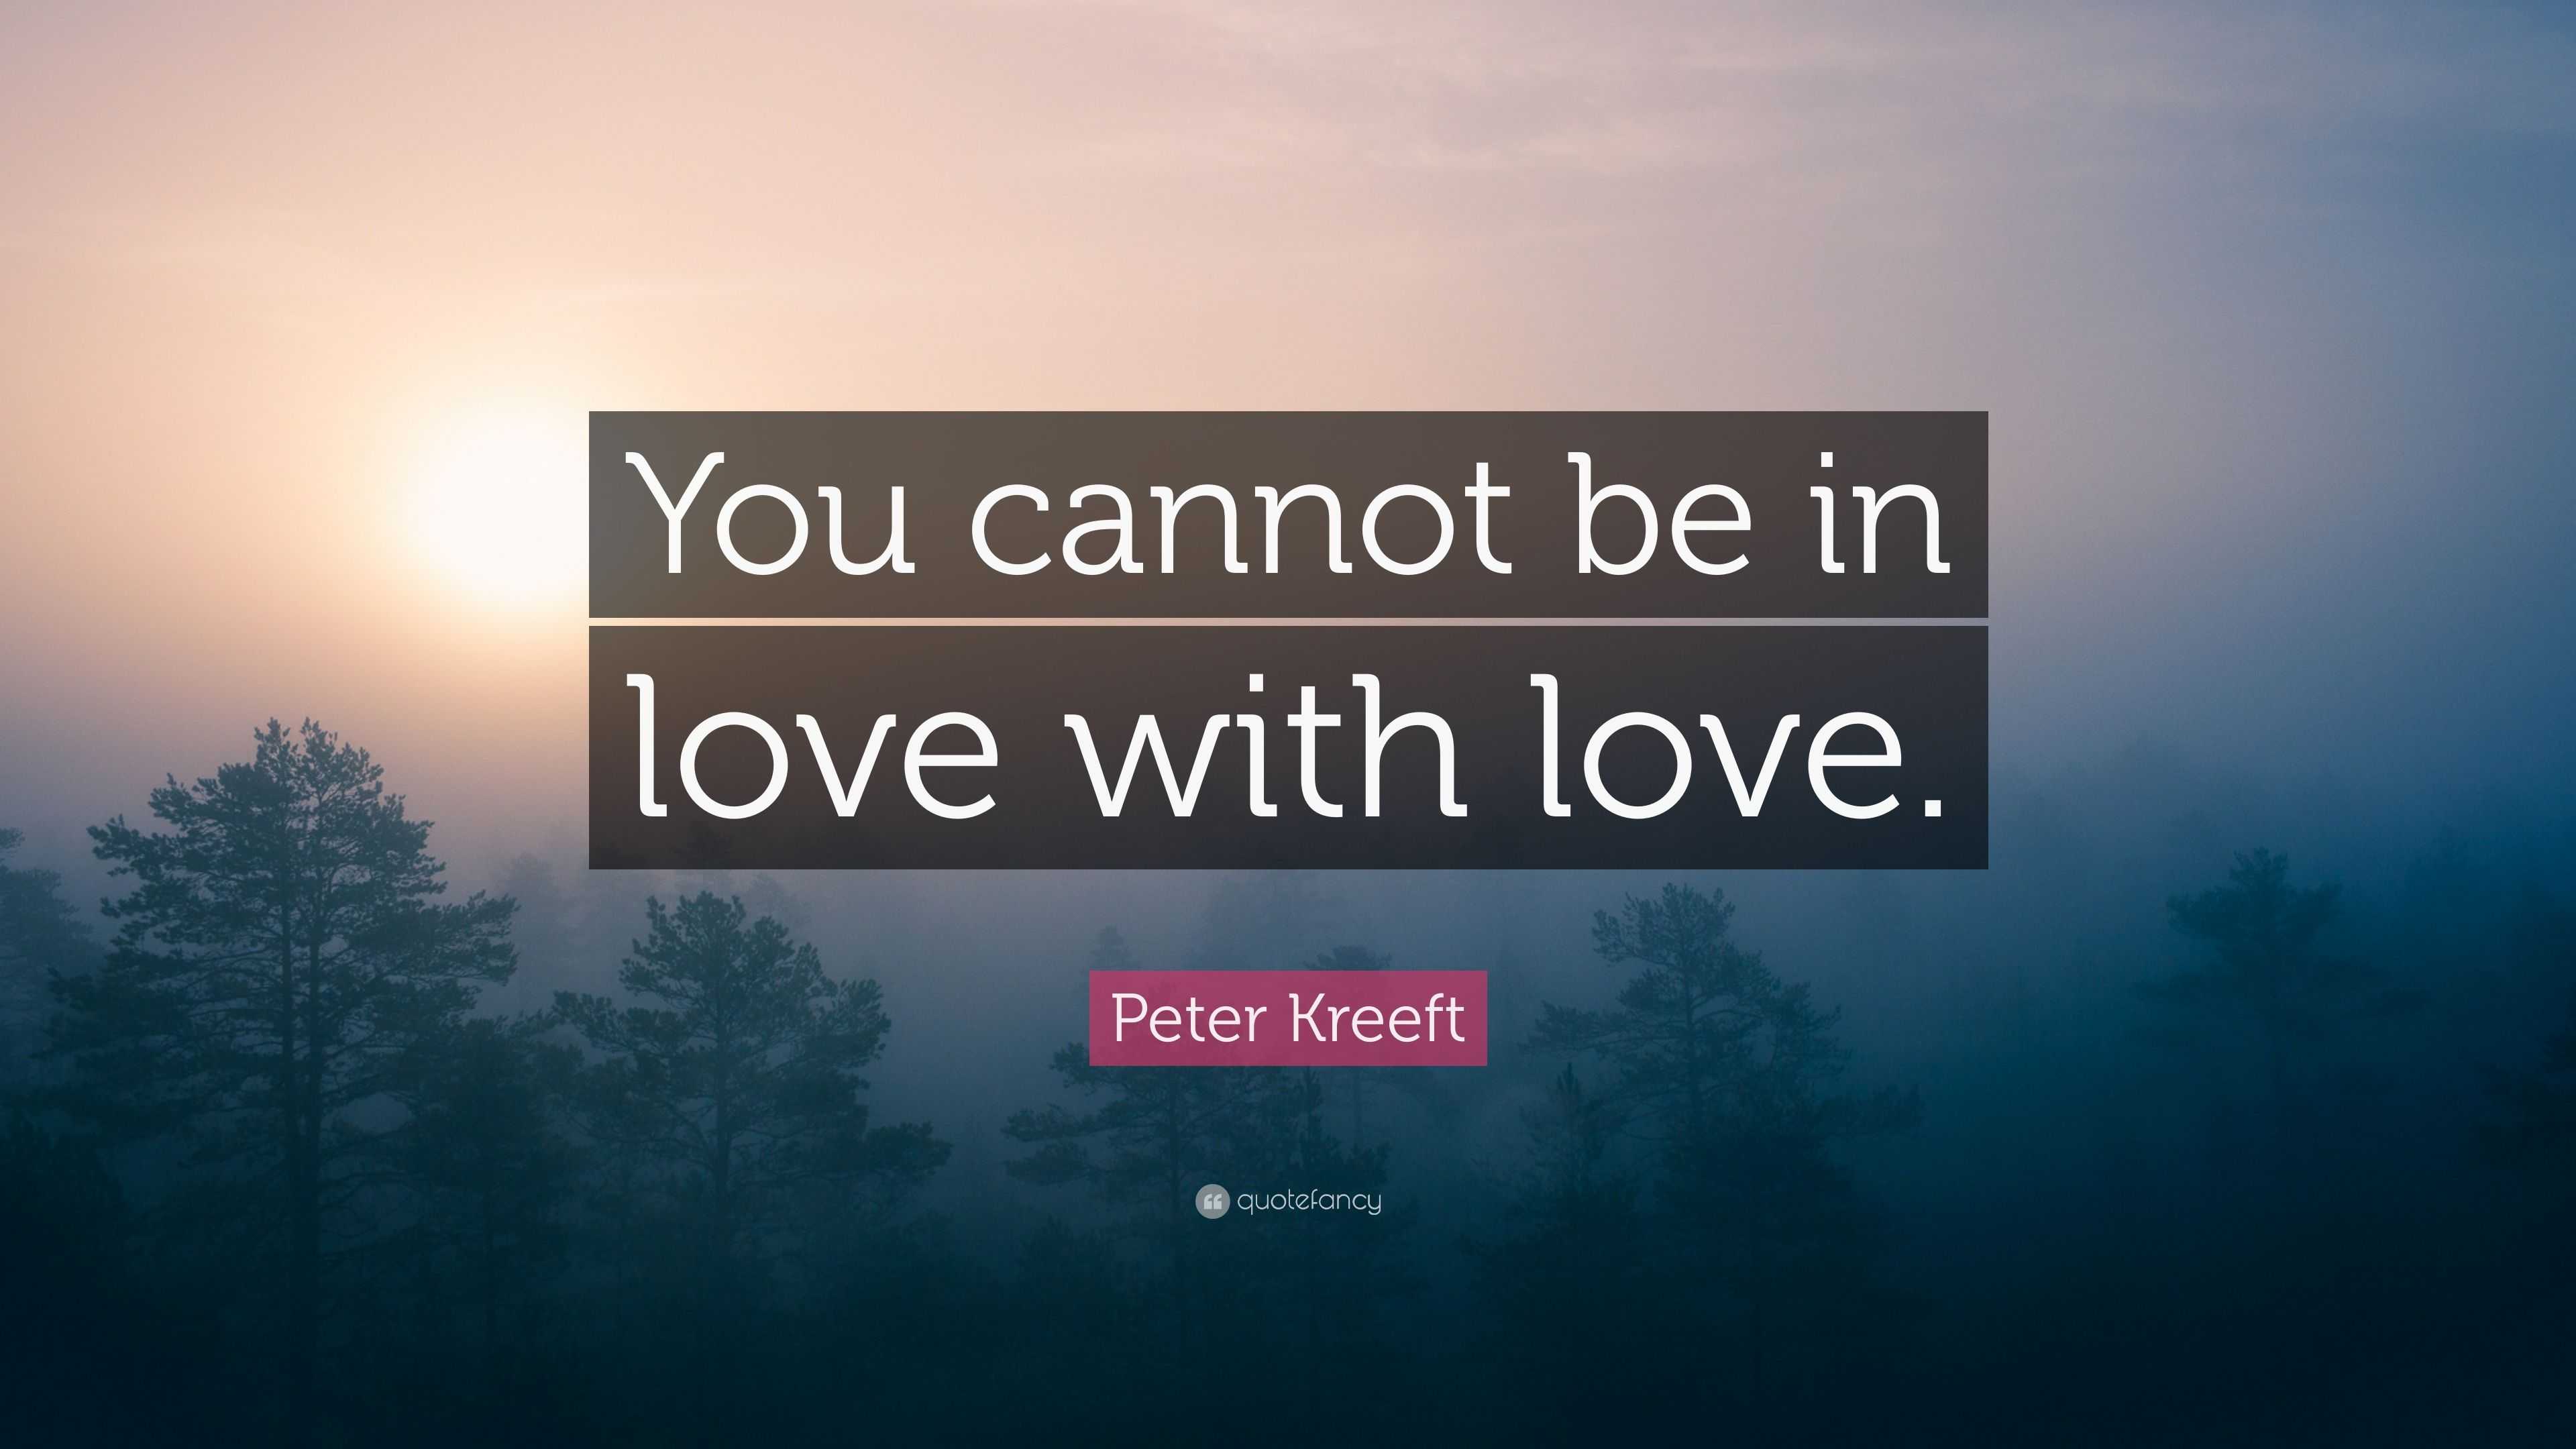 Peter Kreeft Quote: “You cannot be in love with love.”